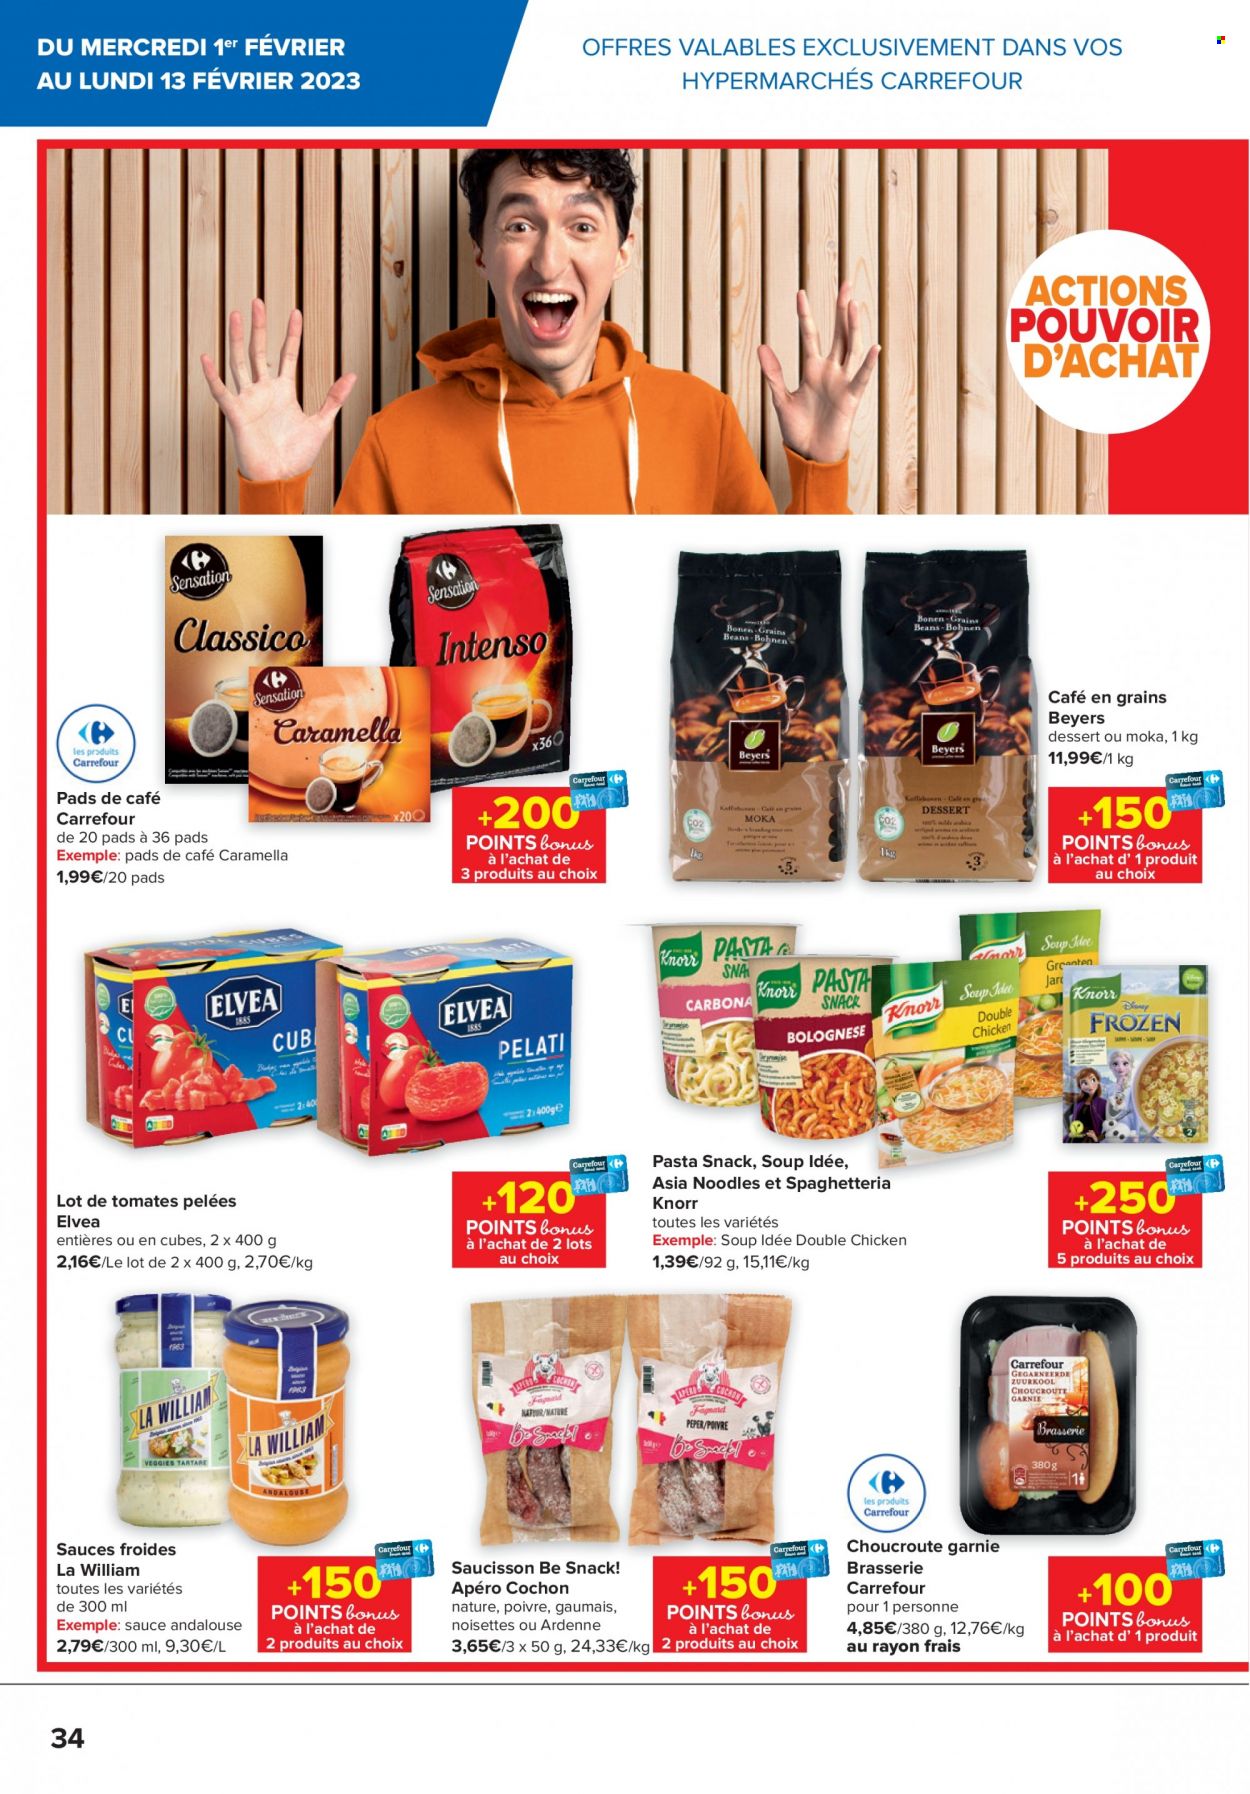 Catalogue Carrefour hypermarkt - 1.2.2023 - 13.2.2023. Page 34.